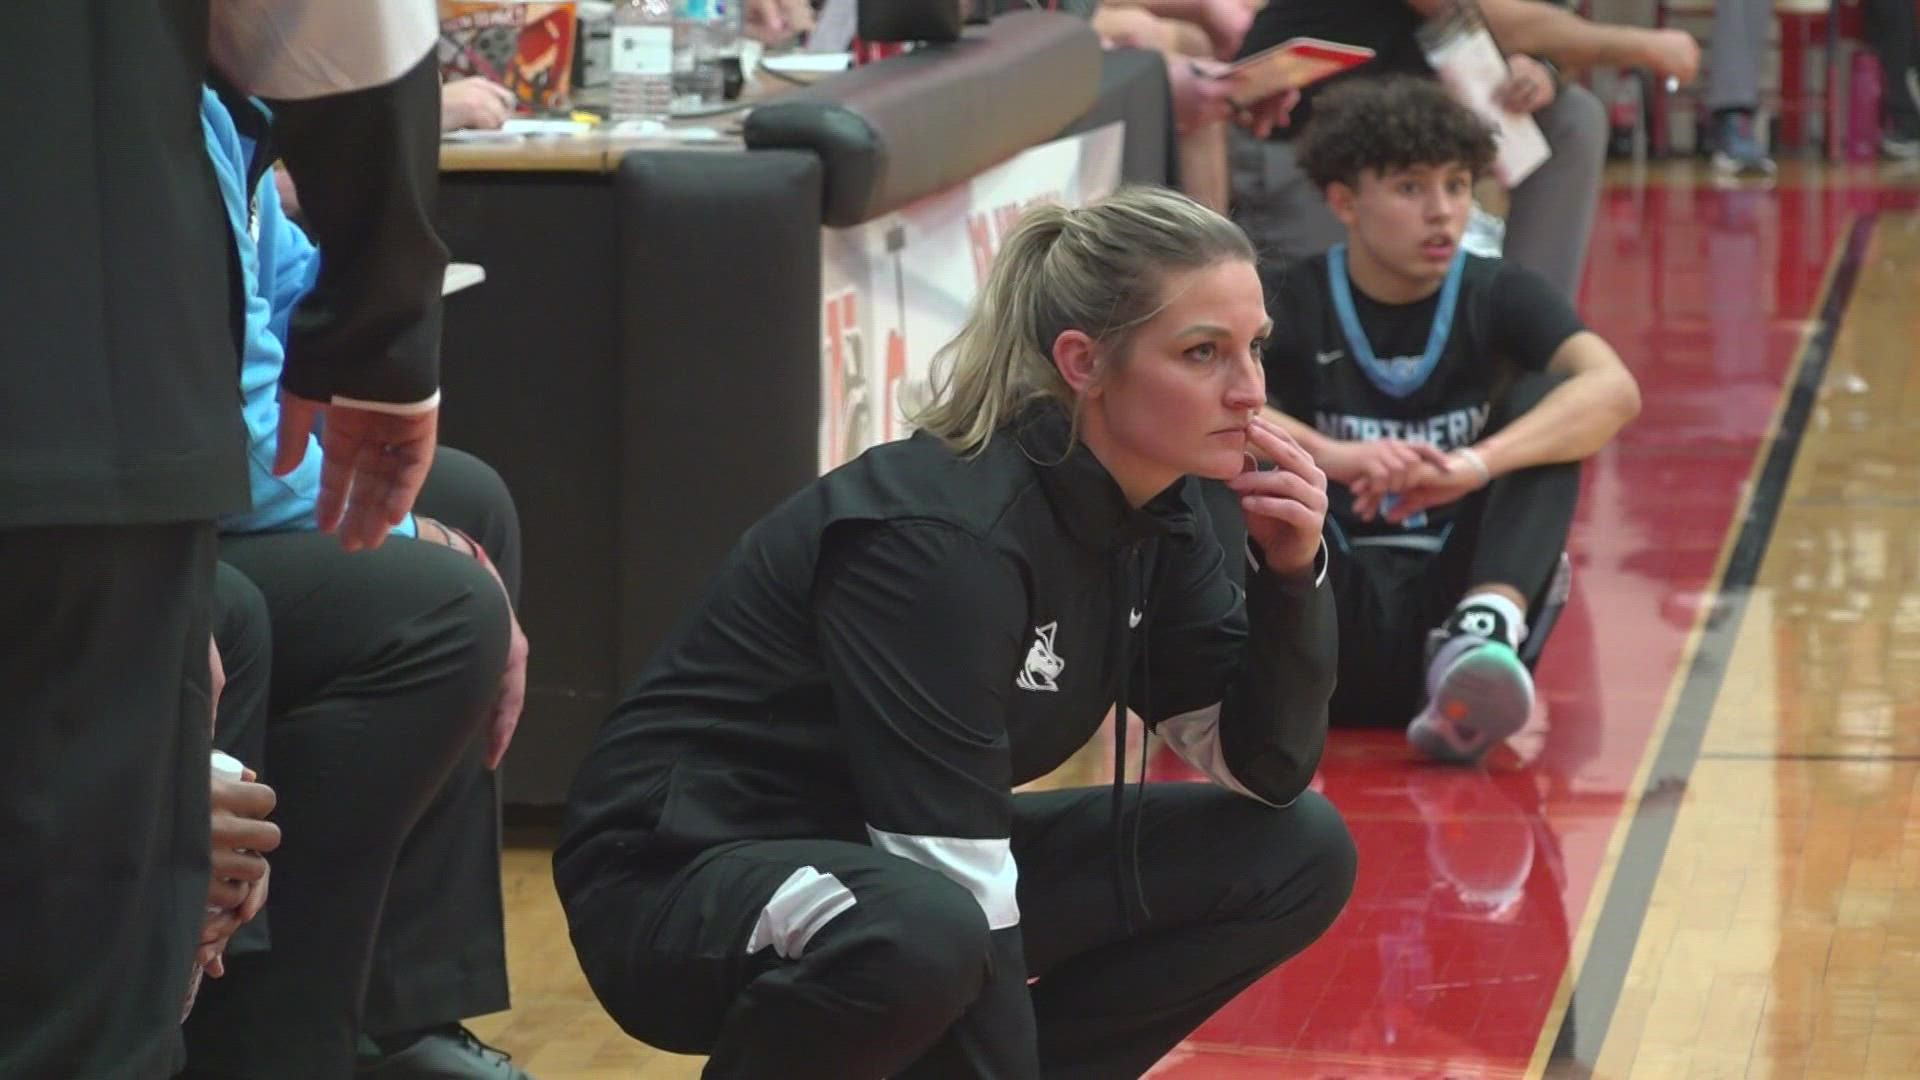 A Forest Hills Northern basketball legend is back at her old stomping grounds, helping young people learn skills about the game, and about life.